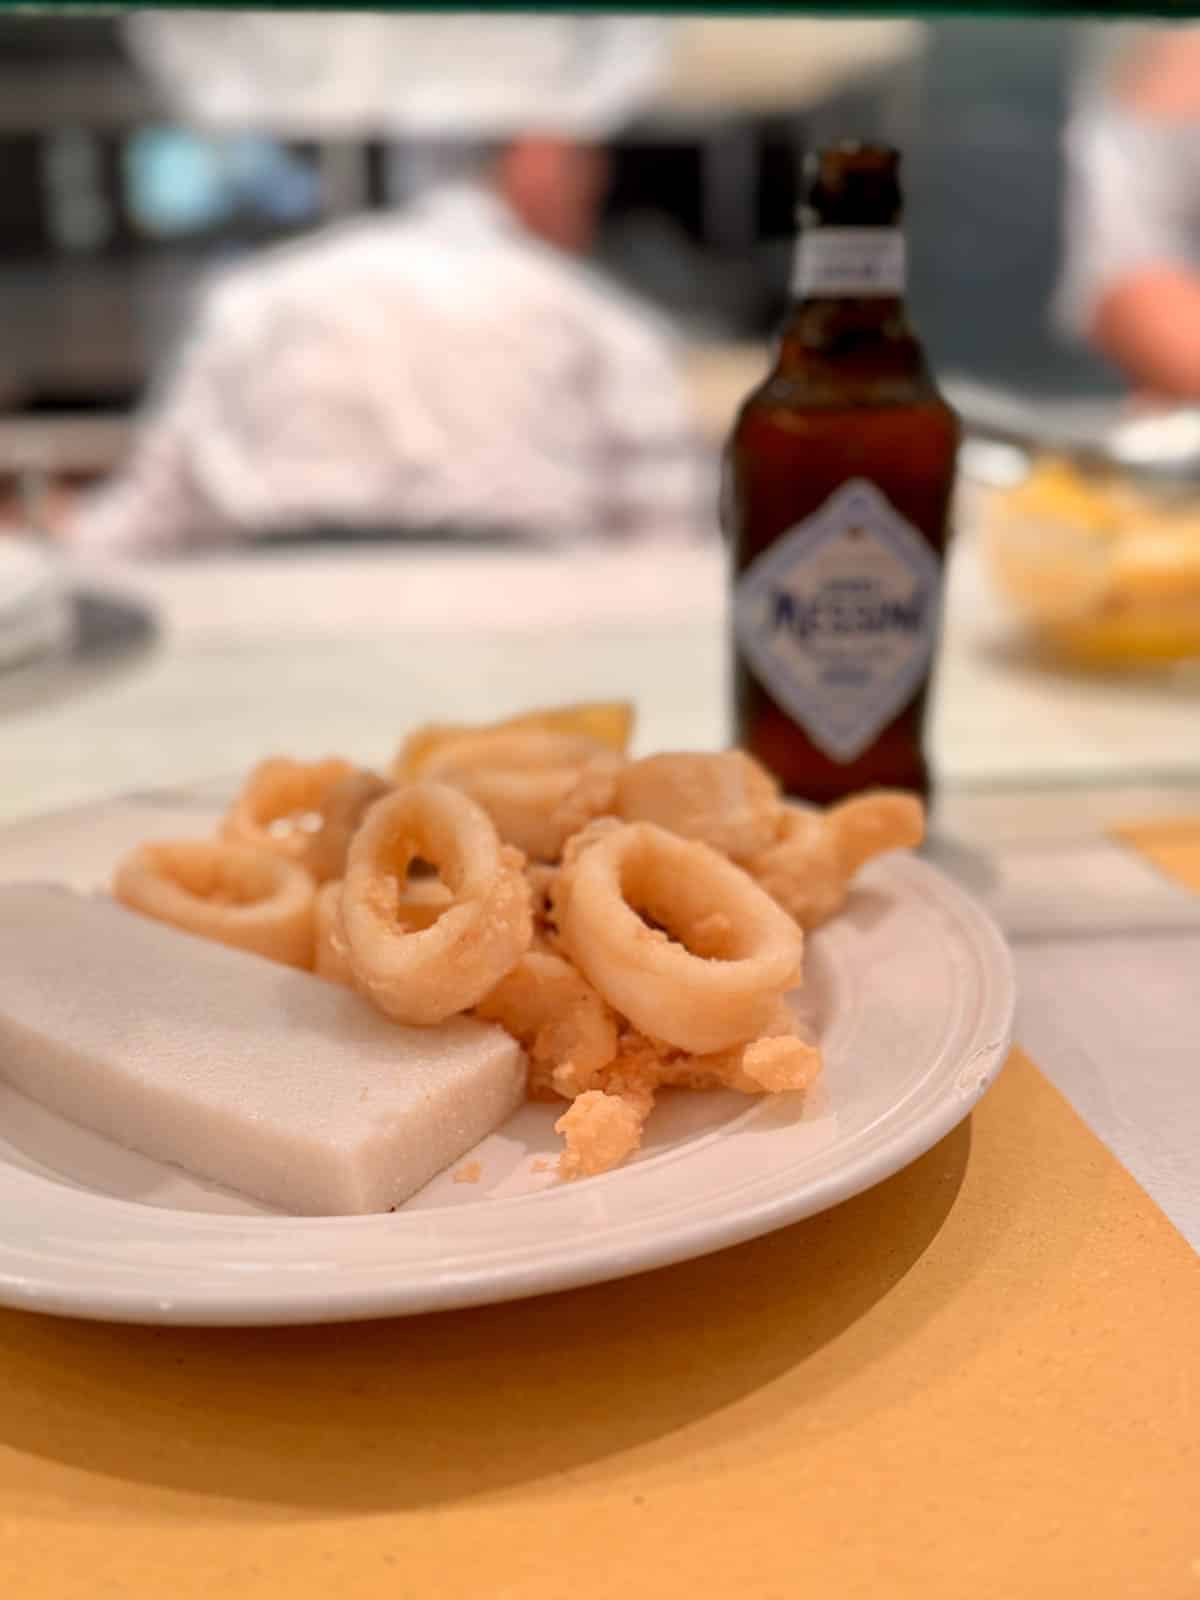 Fried calamari with a bottle of beer in background.